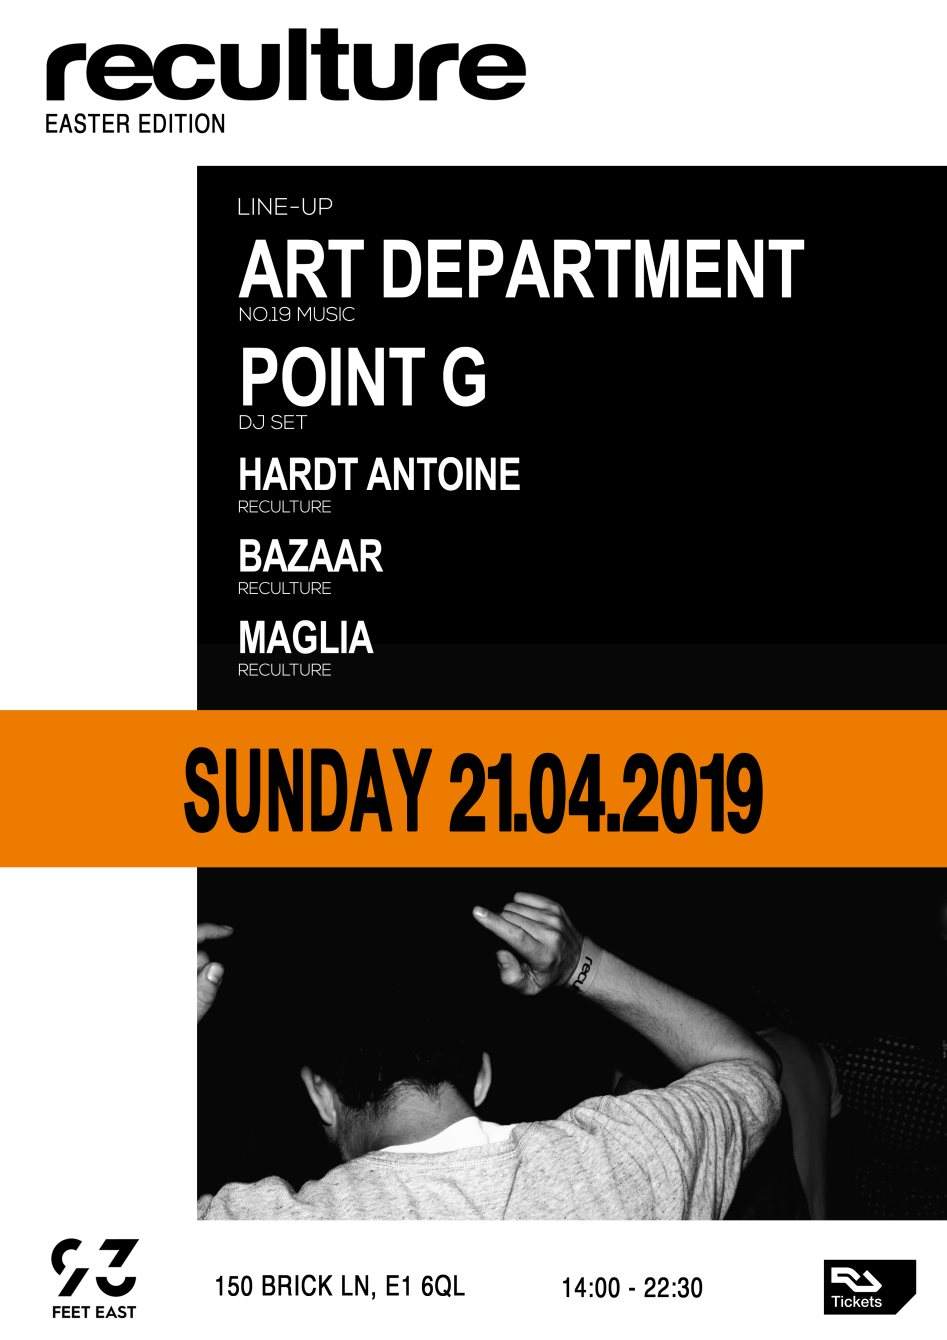 Reculture Easter Edition with Art Department + Point G (DJ Set) - Página trasera